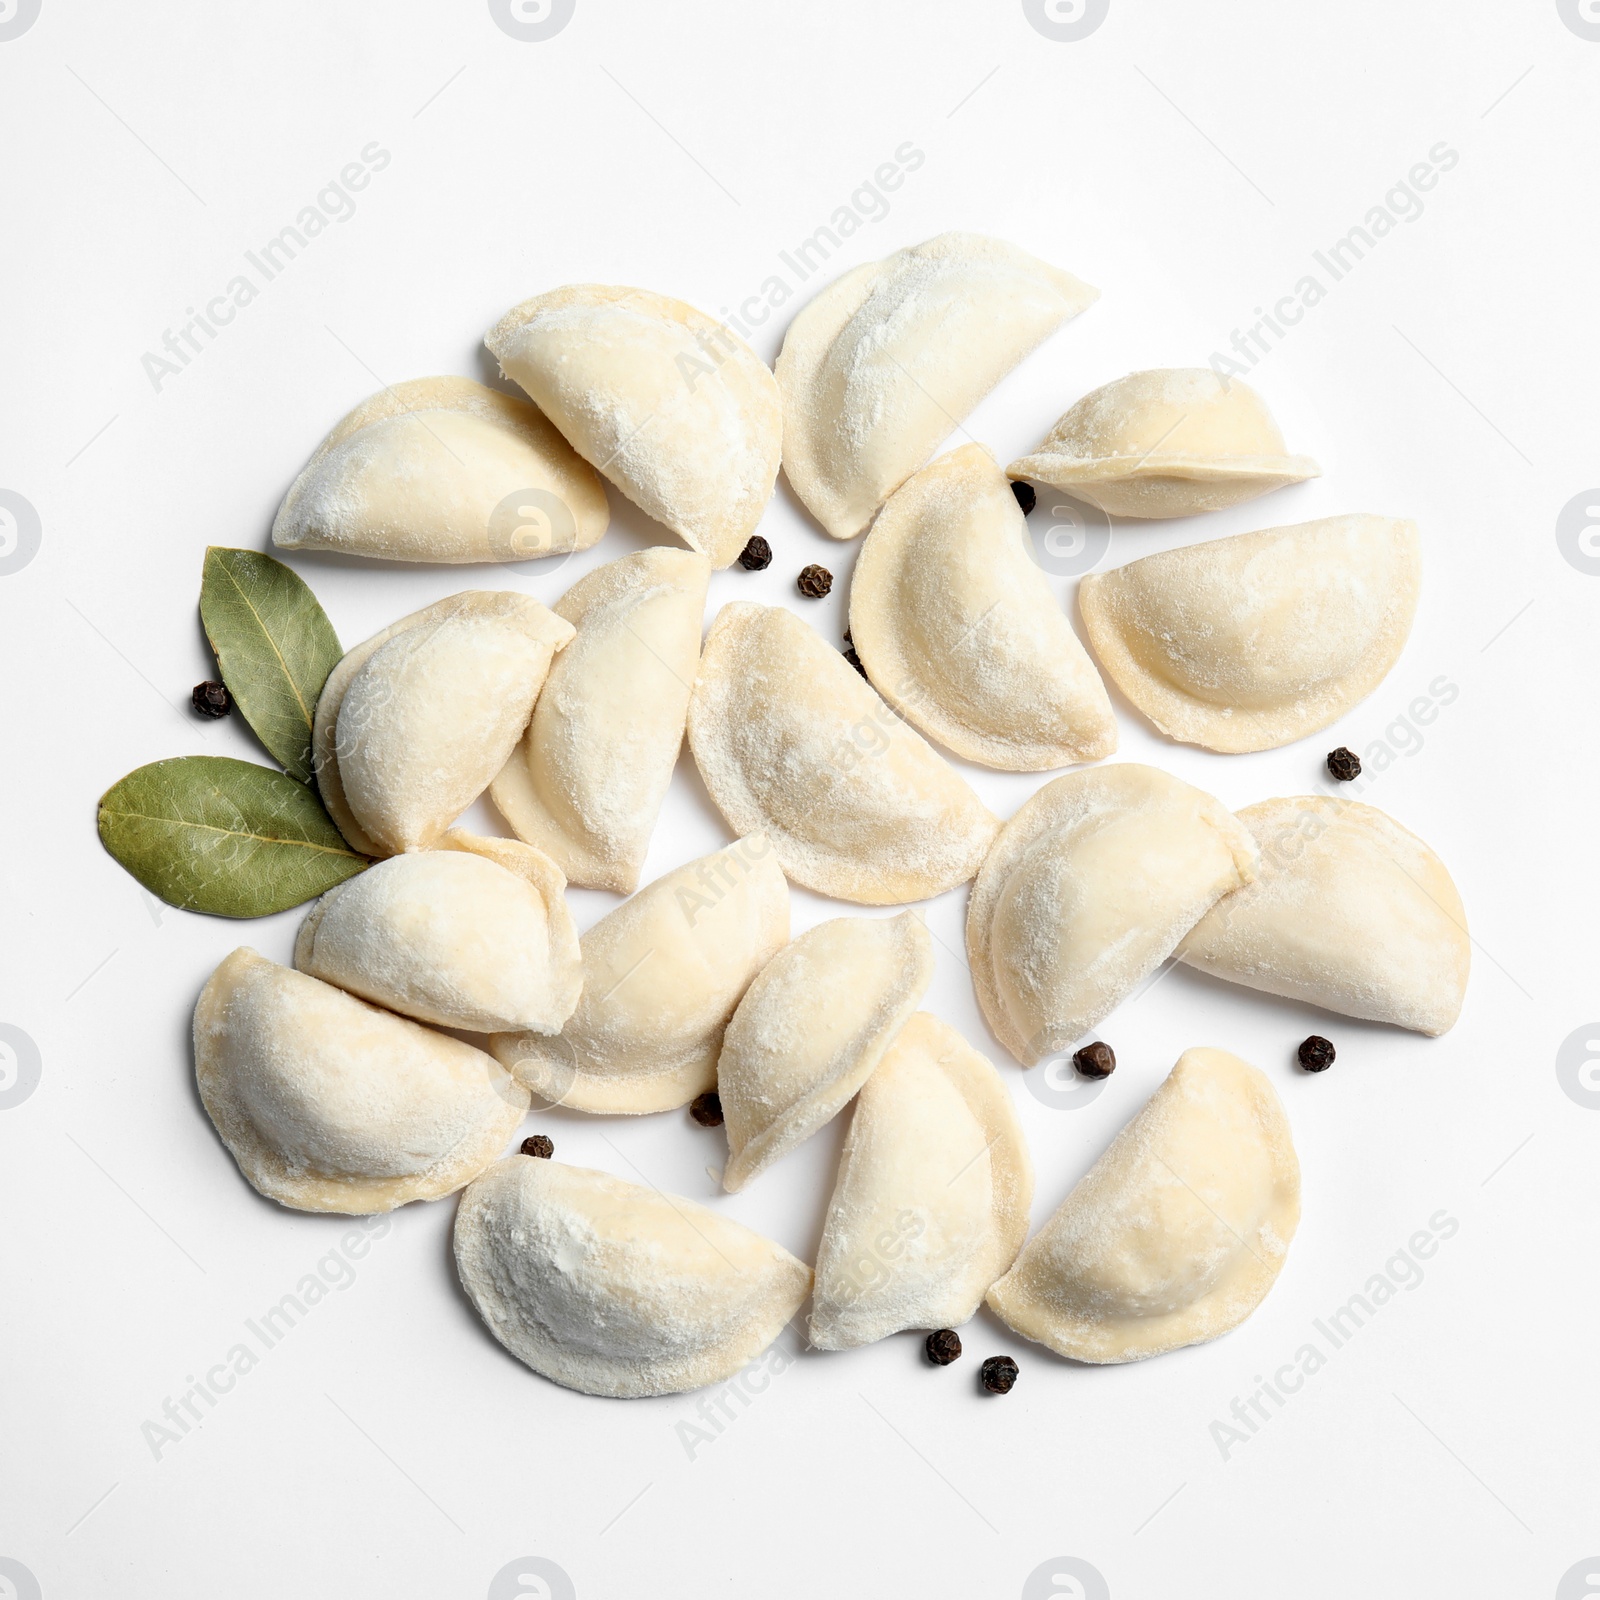 Photo of Raw dumplings on white background, top view. Home cooking